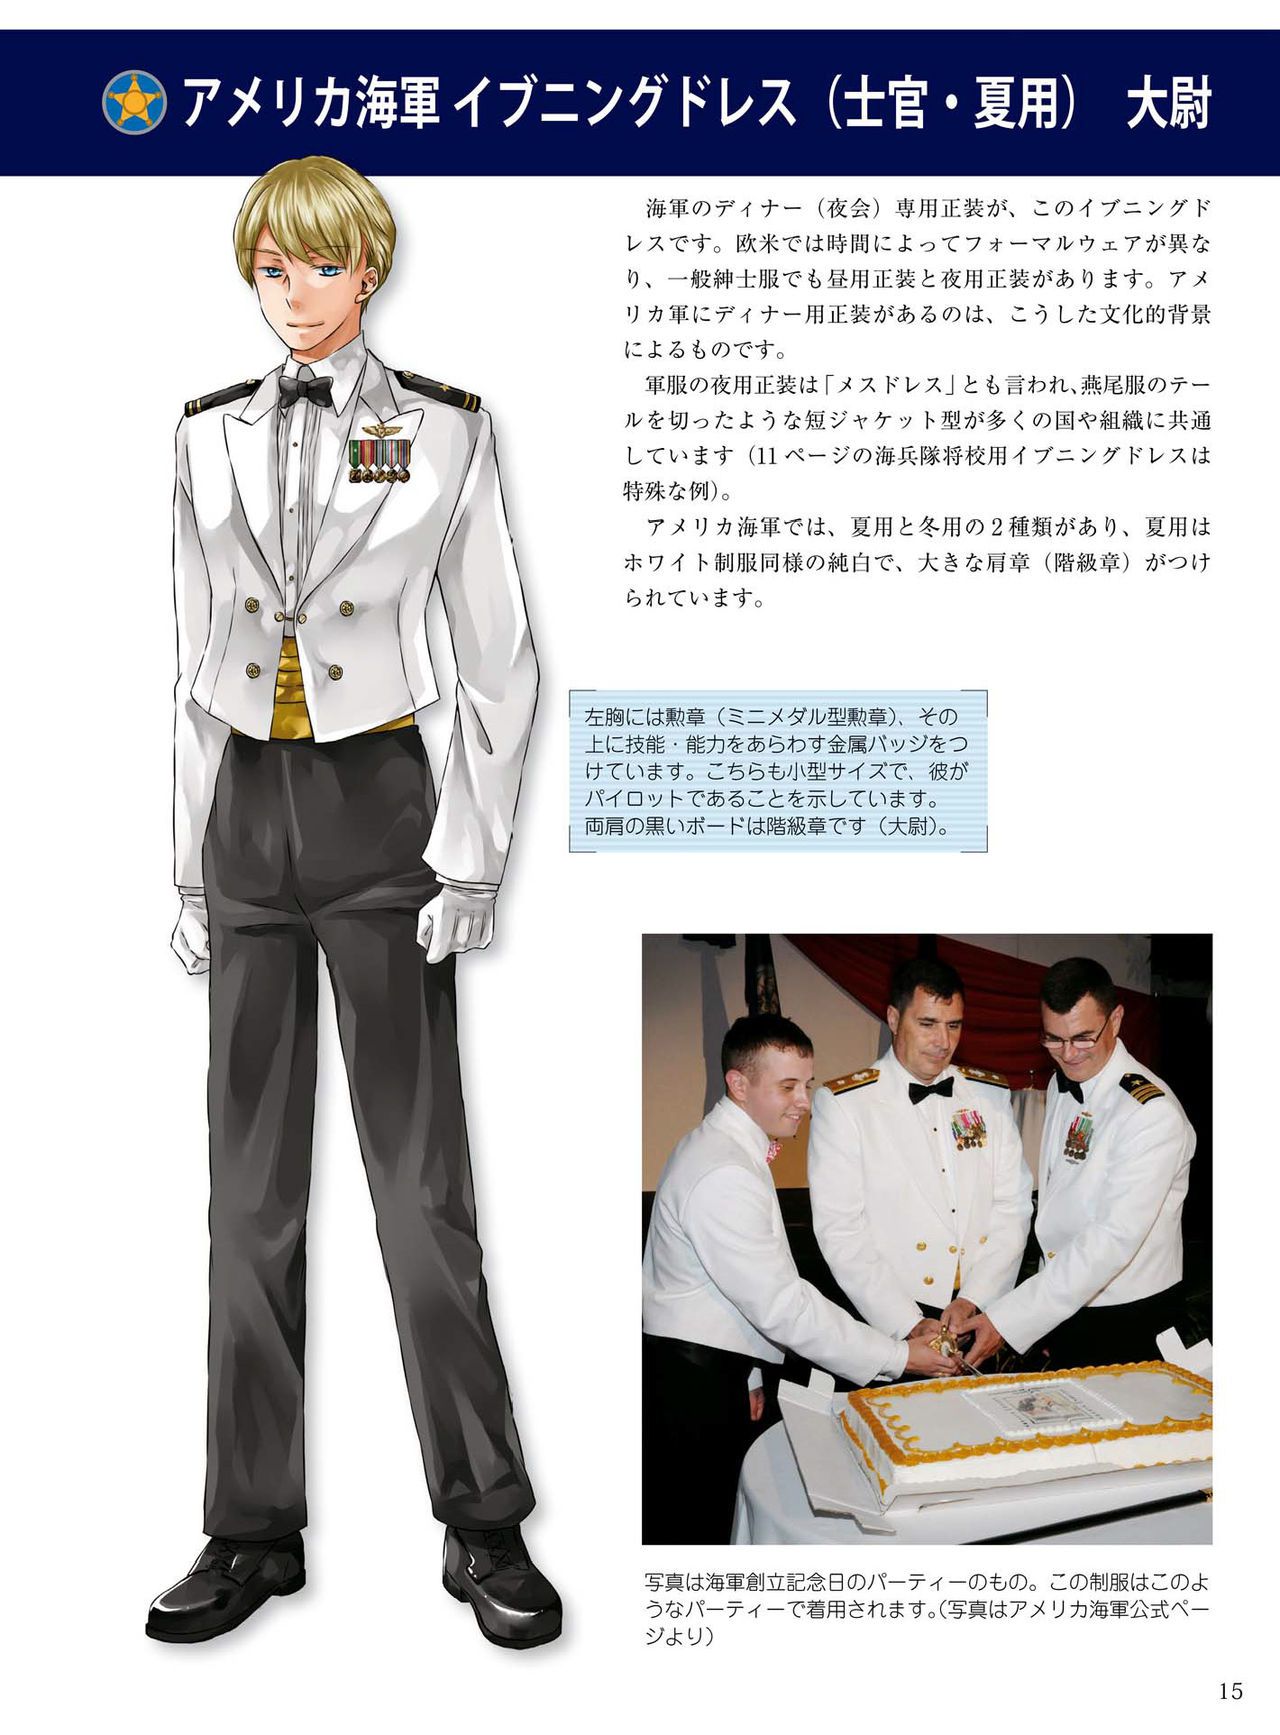 How to draw military uniforms and uniforms From Self-Defense Forces 軍服・制服の描き方 アメリカ軍・自衛隊の制服から戦闘服まで 18